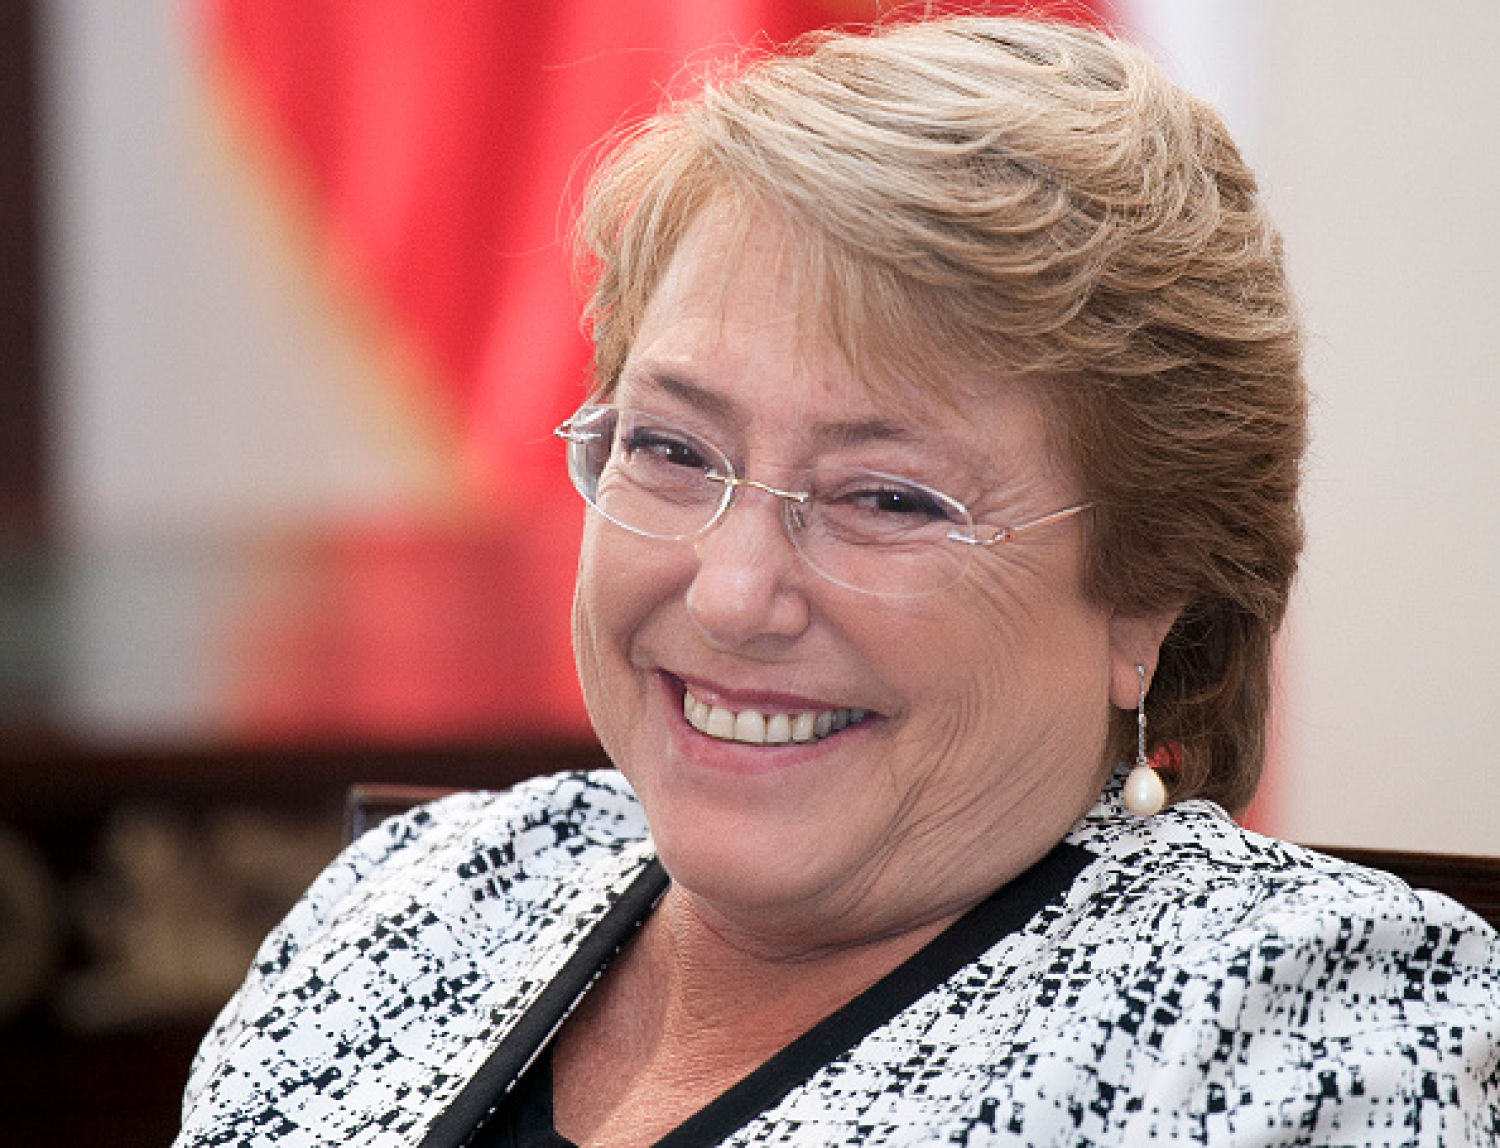 Welcome To My World Chile’s President Promises To Take A Stand For Marriage Equality